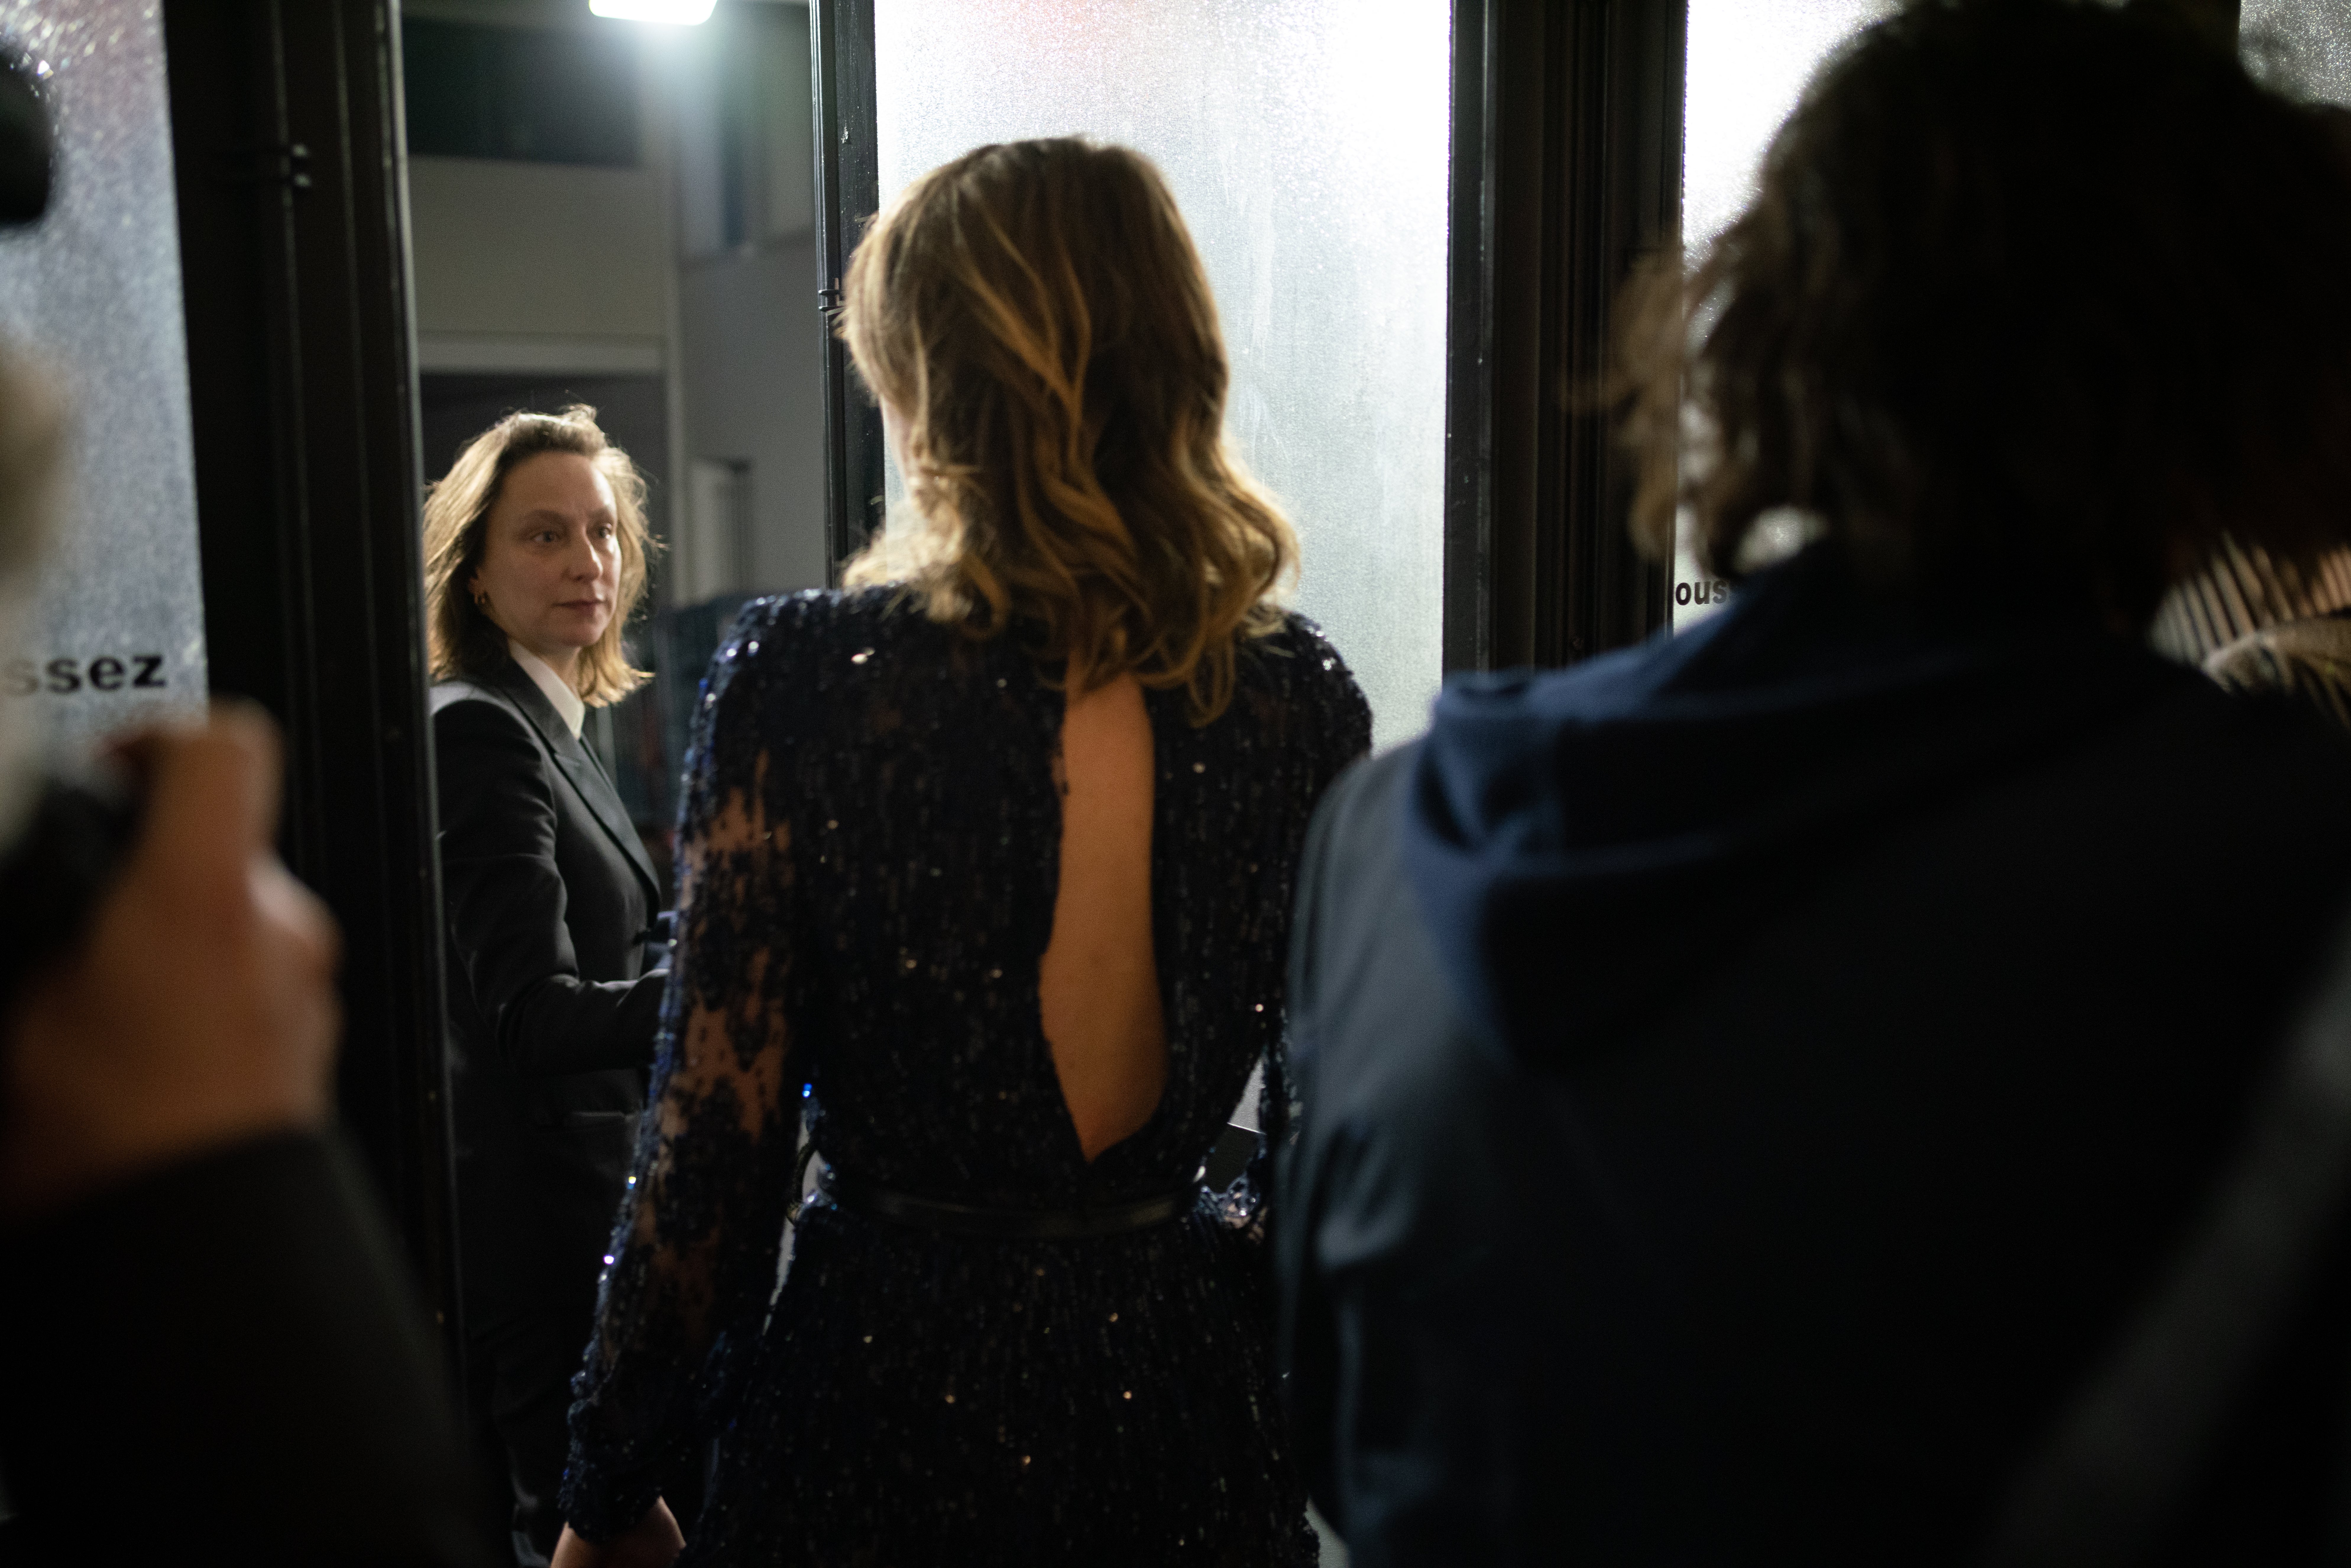 Adèle Haenel walks out of the 2020 César awards after the prize for best director is given to Roman Polanski